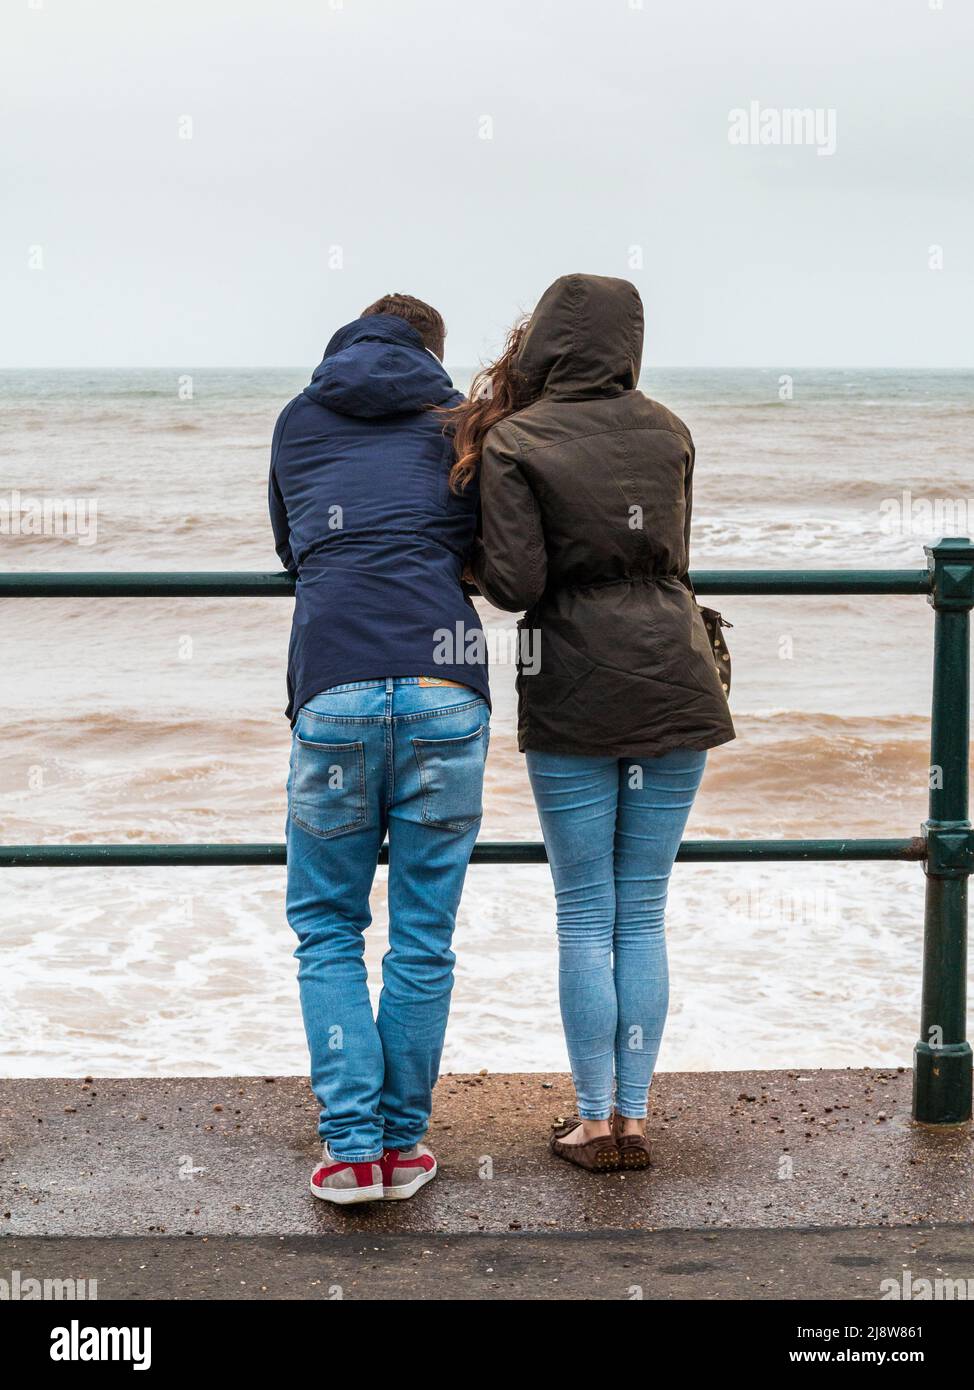 Two people watch the waves during a storm at Sidmouth Devon Stock Photo